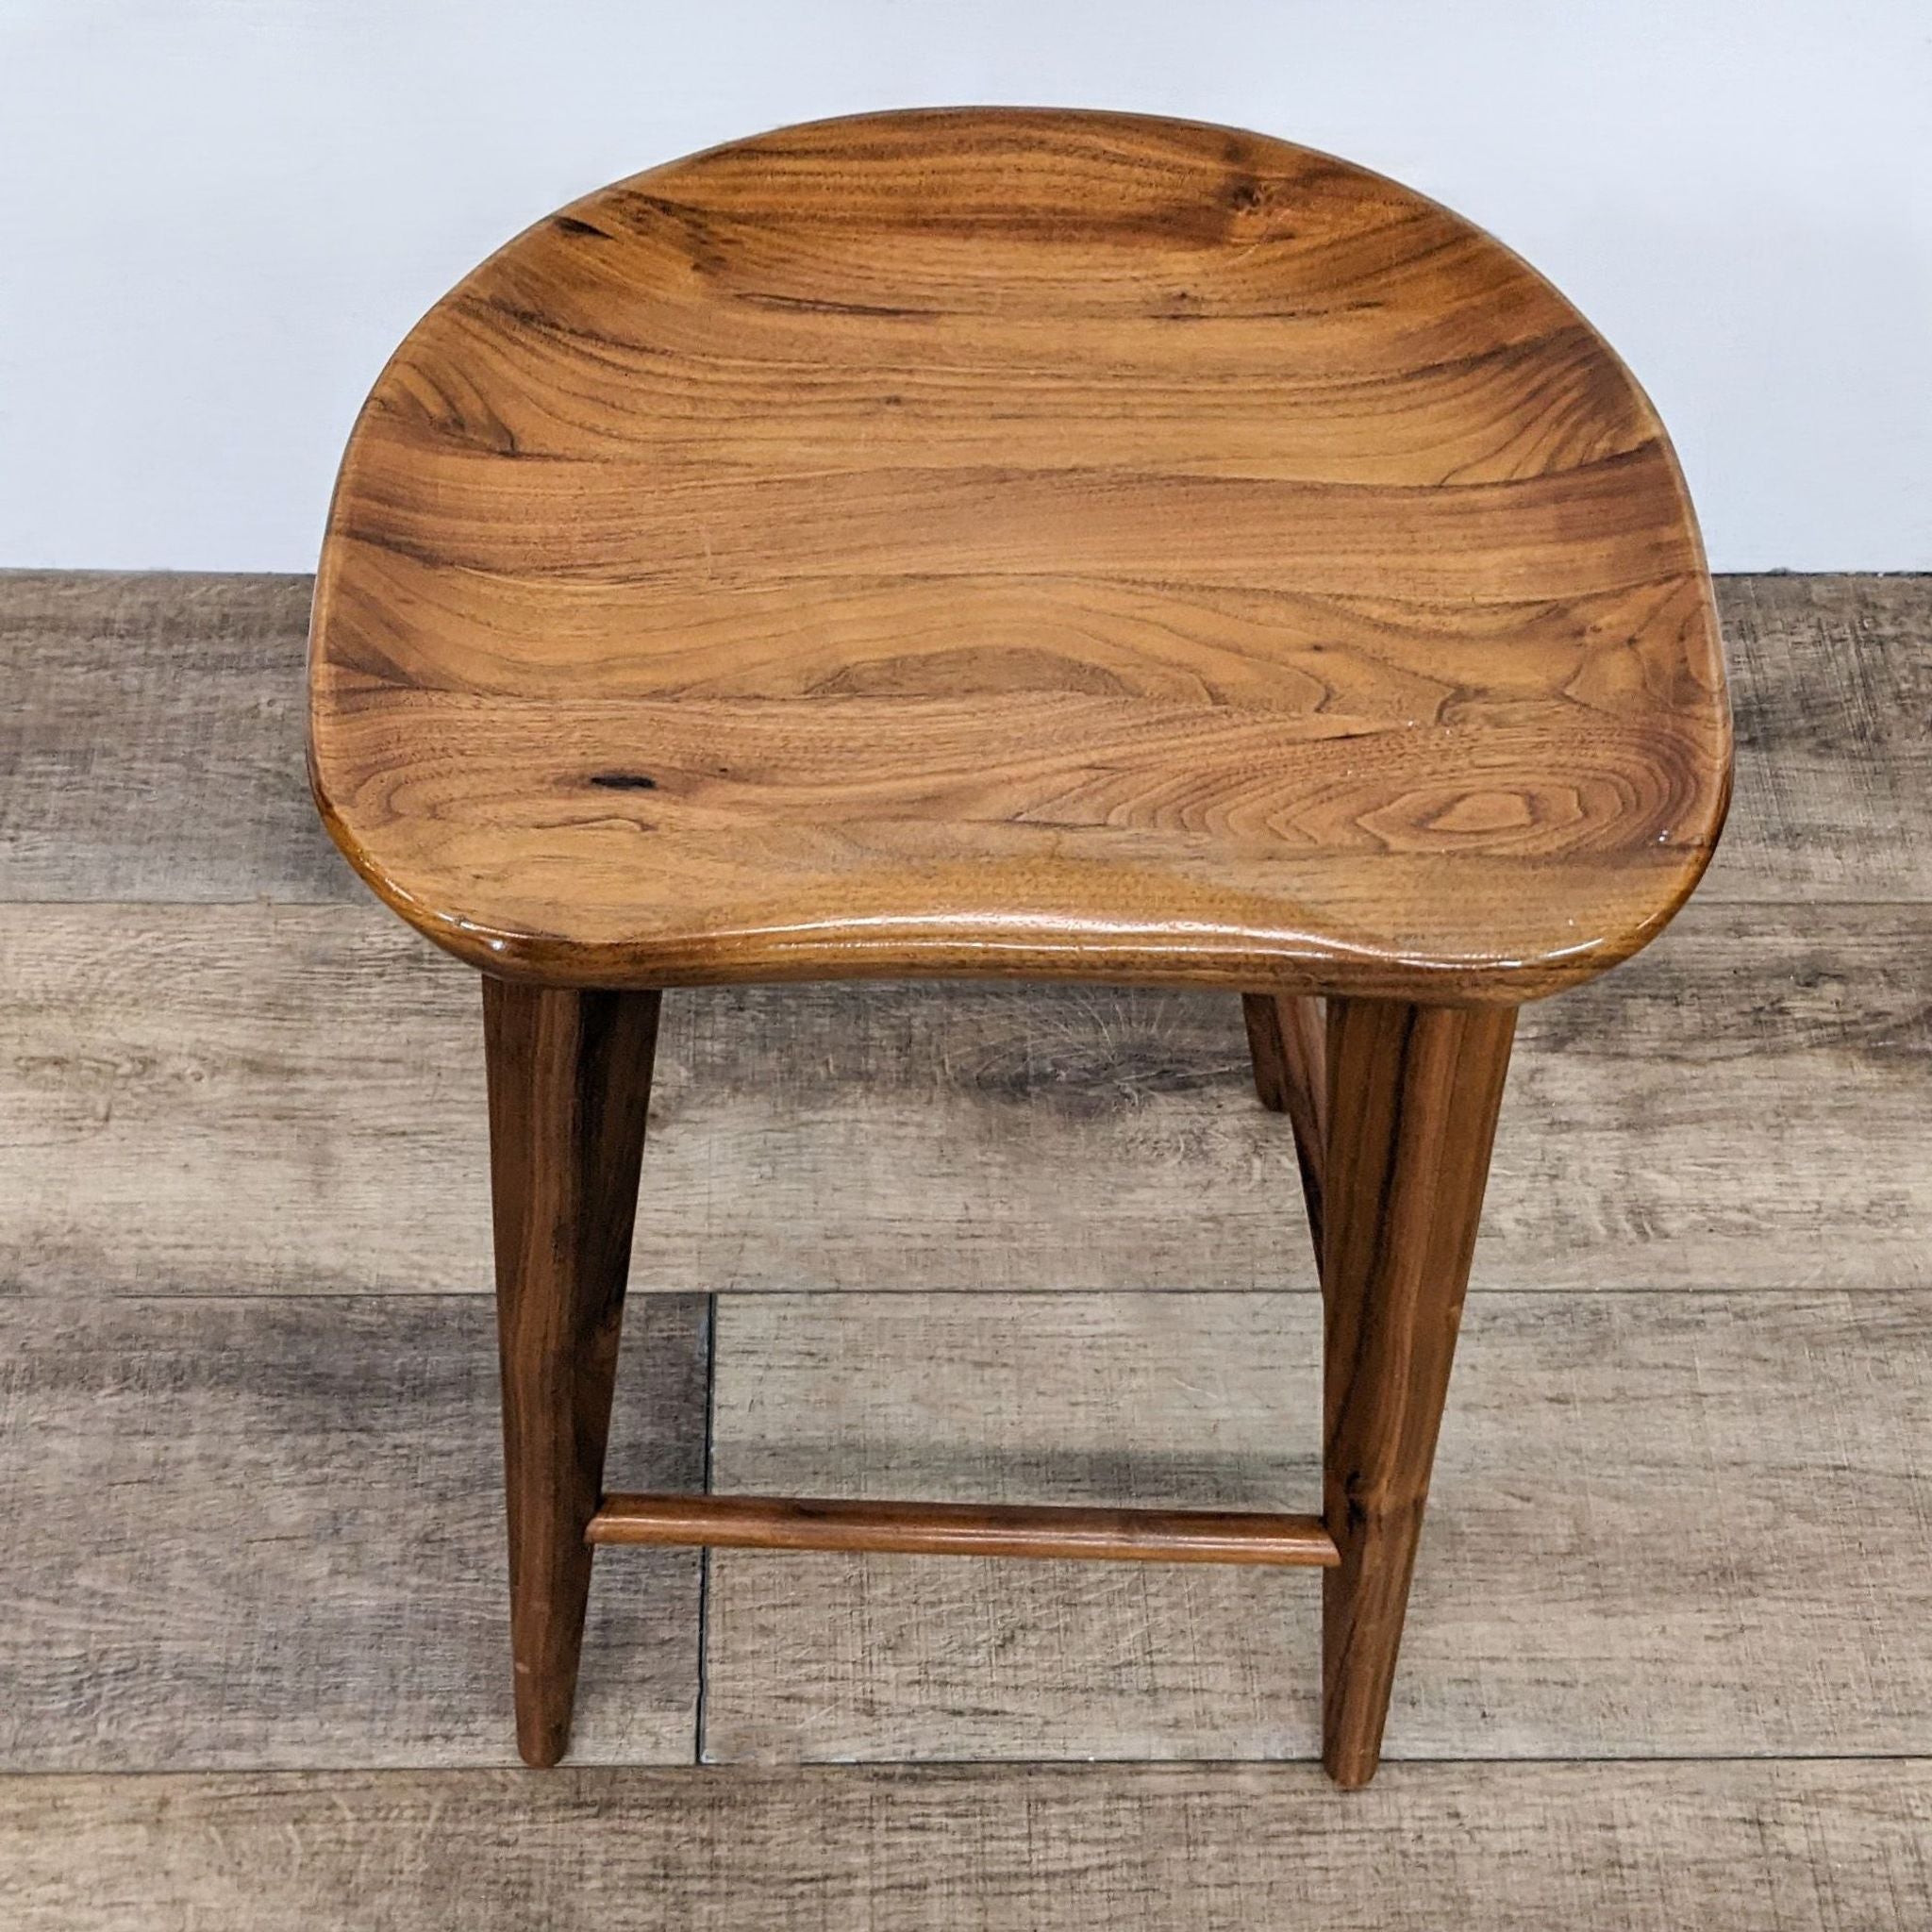 2. Overhead view of a Rejuvenation wooden stool with a curved seat, showcasing its wood grain and finish.